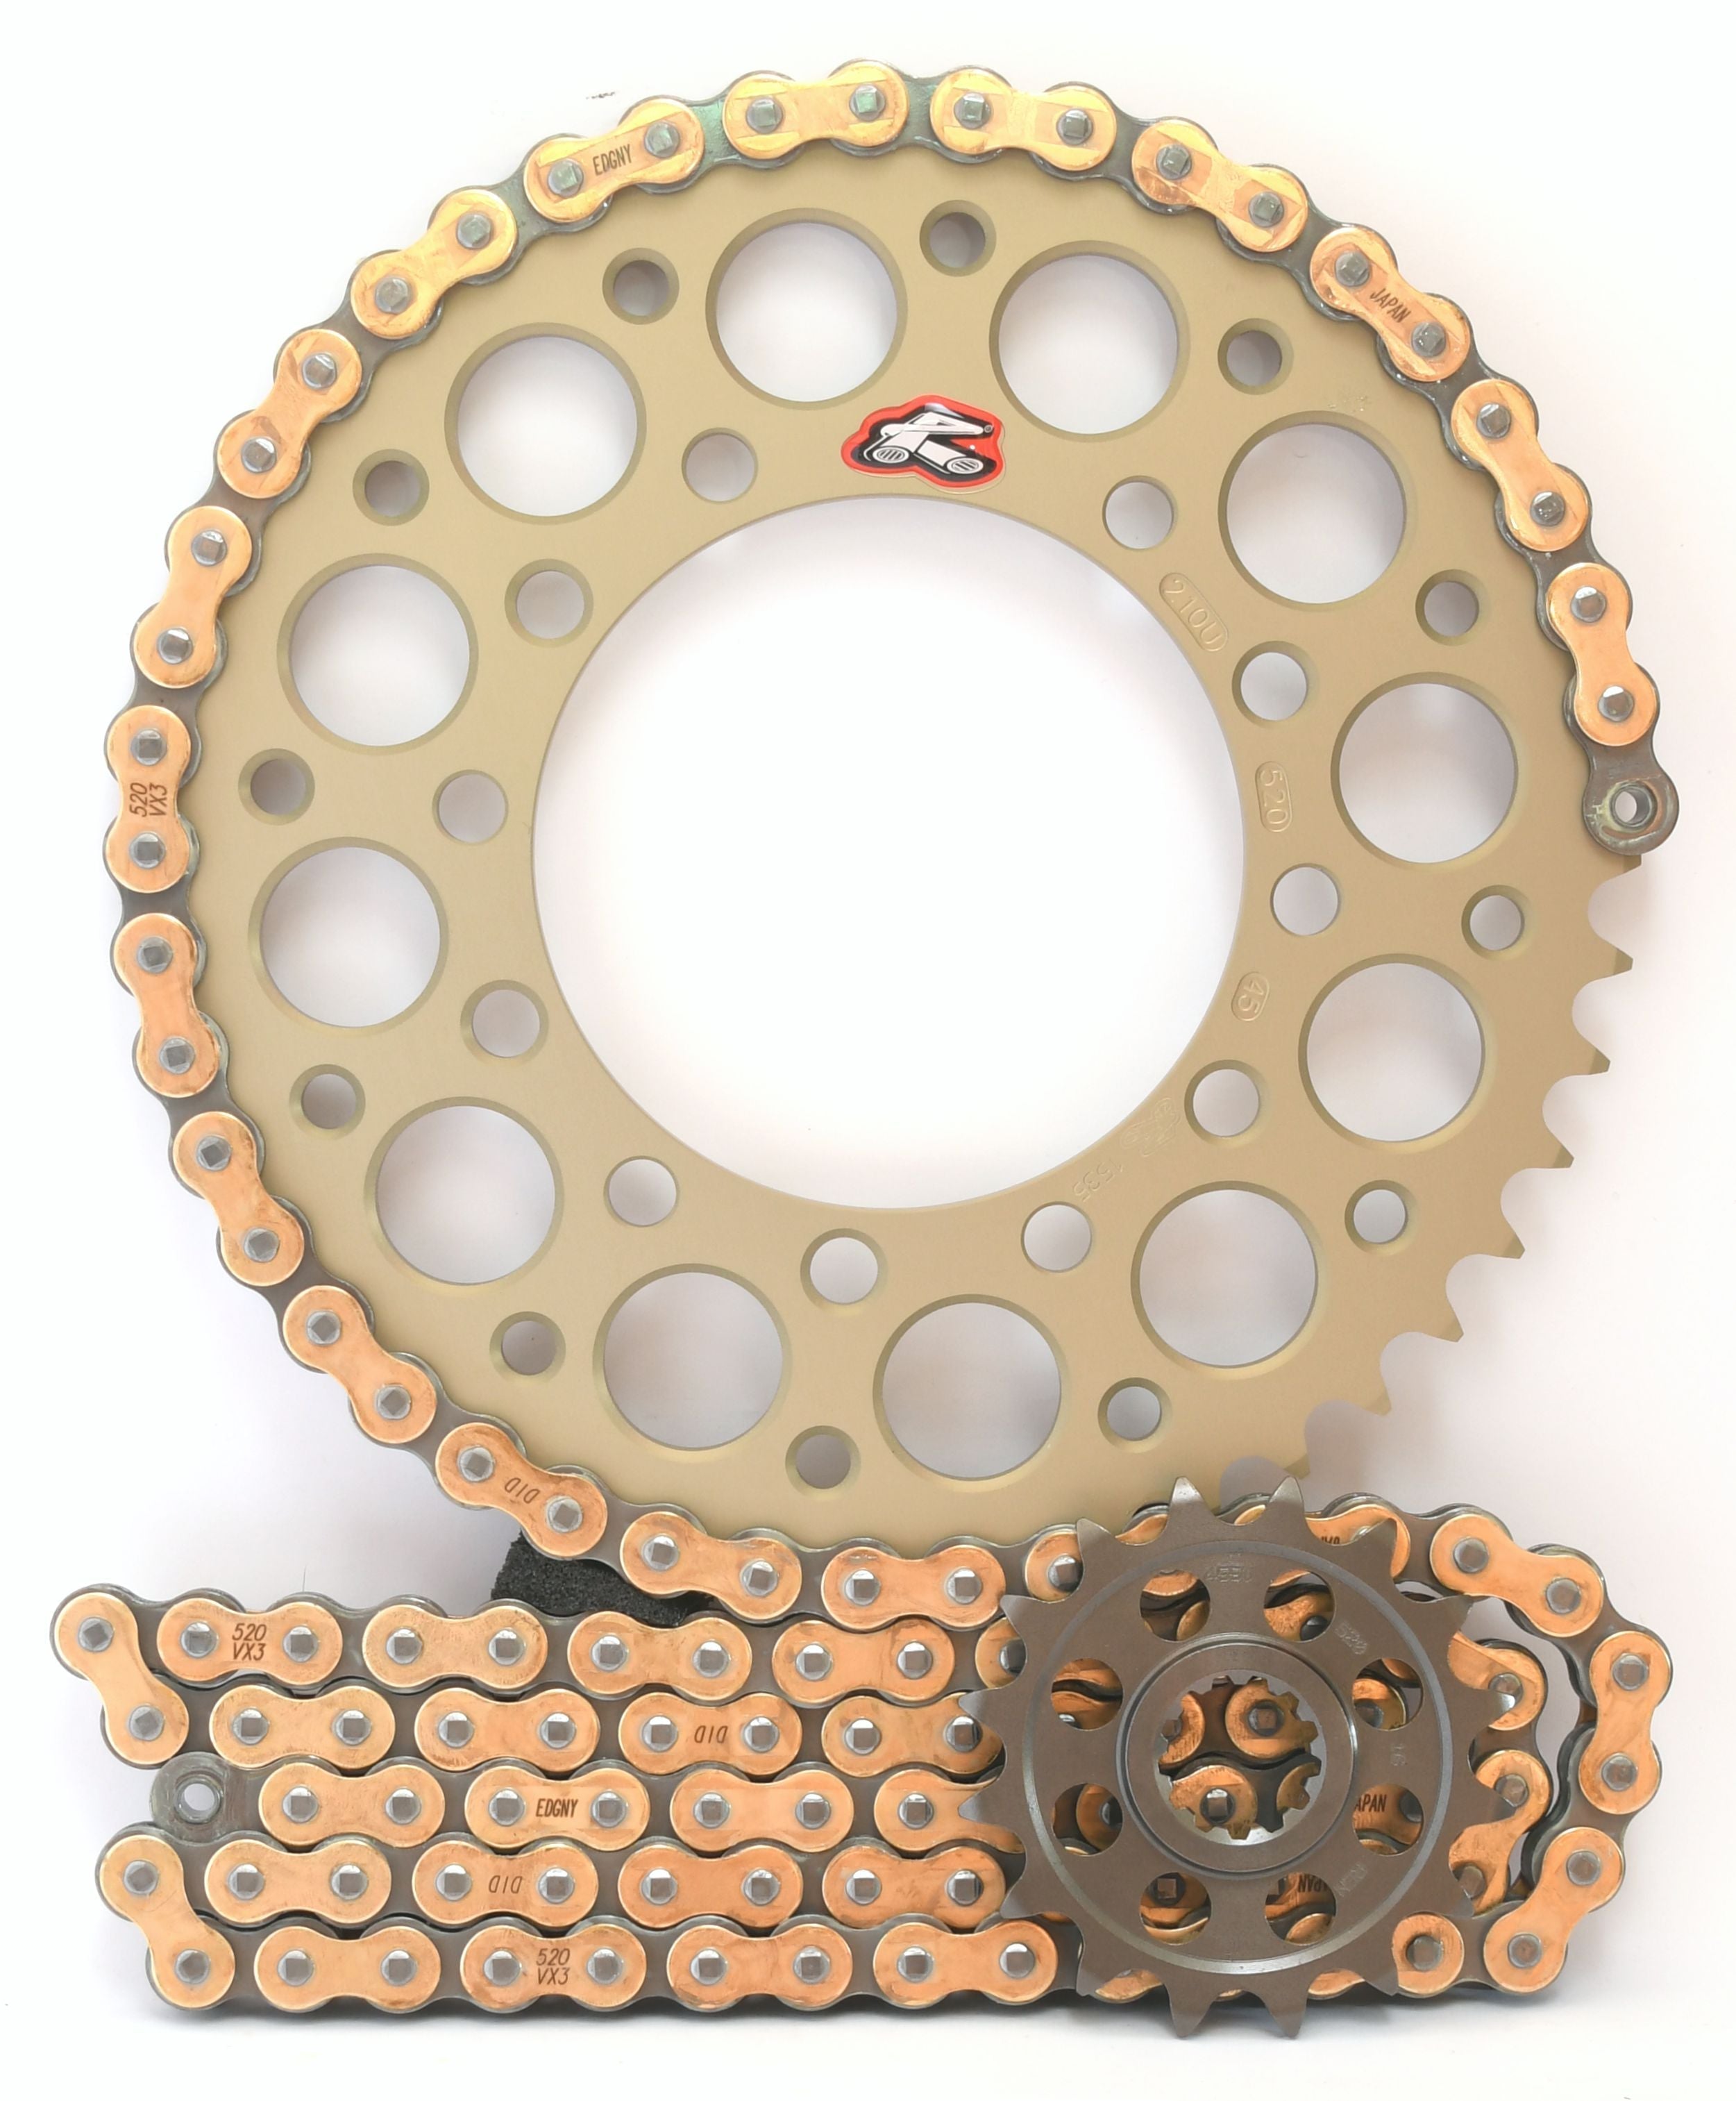 Renthal Ultralight and DID Chain & Sprocket Kit 520 Conversion for GSX-R750 2004-2005 - Standard Gearing